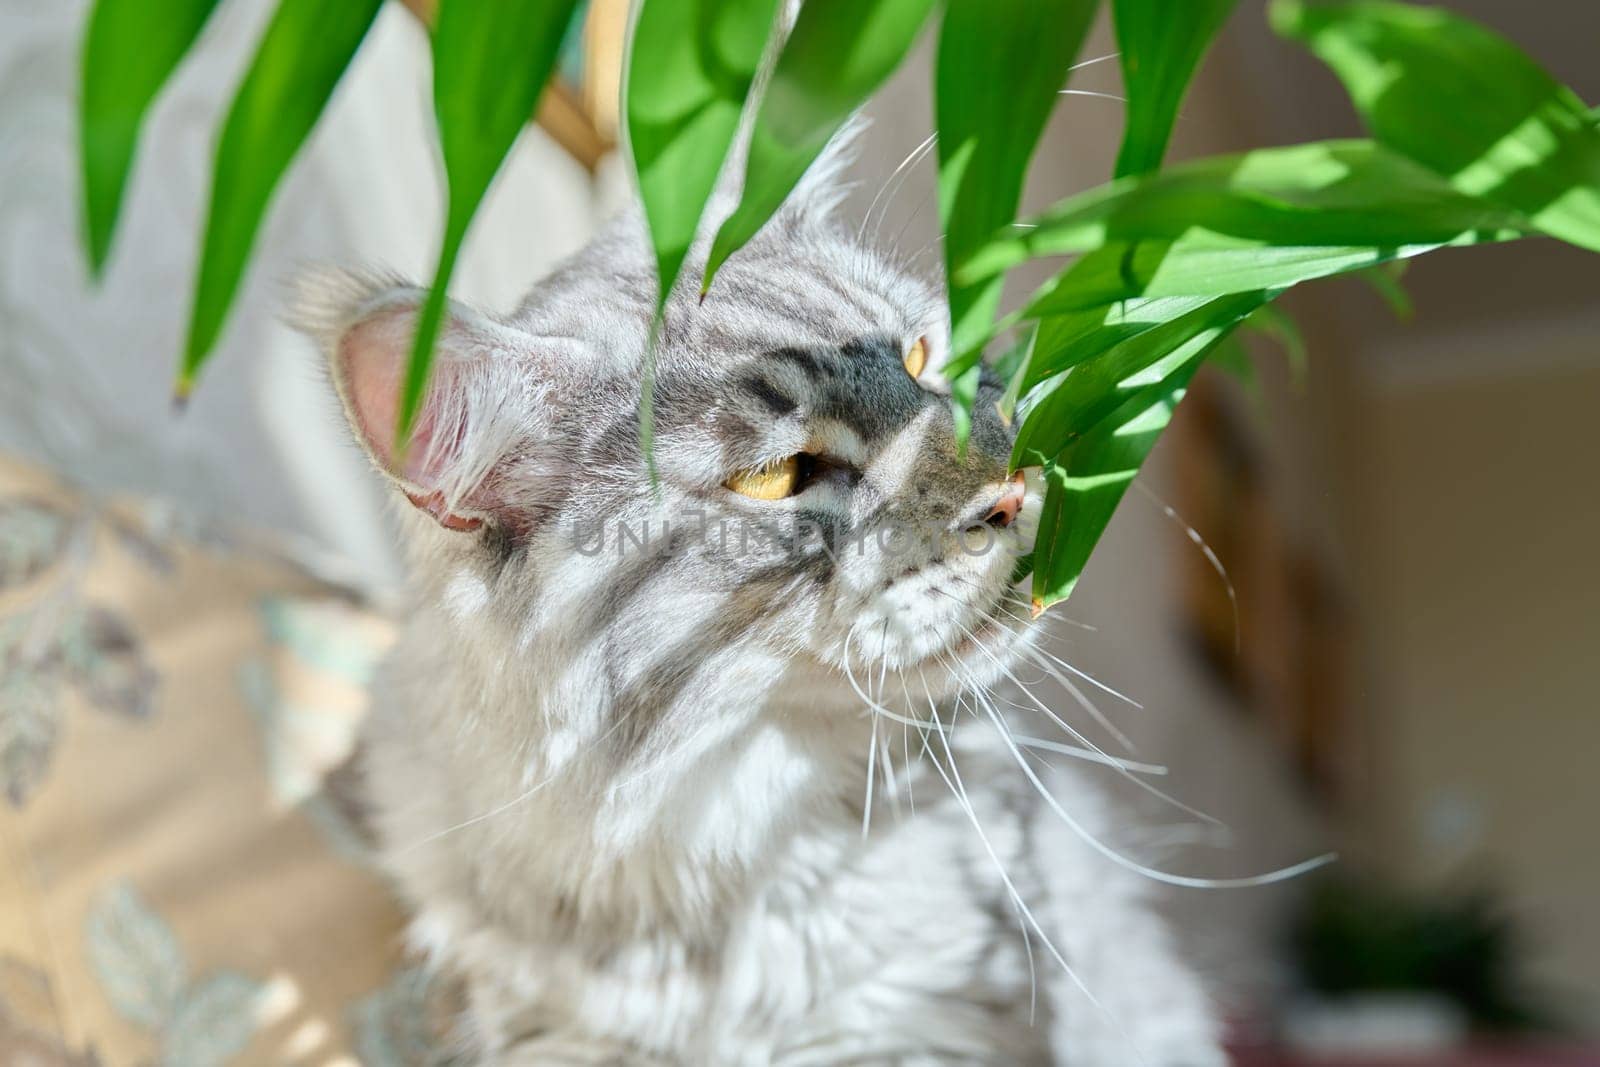 Close-up of a cat sniffing and biting a green houseplant. Pets, house, animals, lifestyle concept